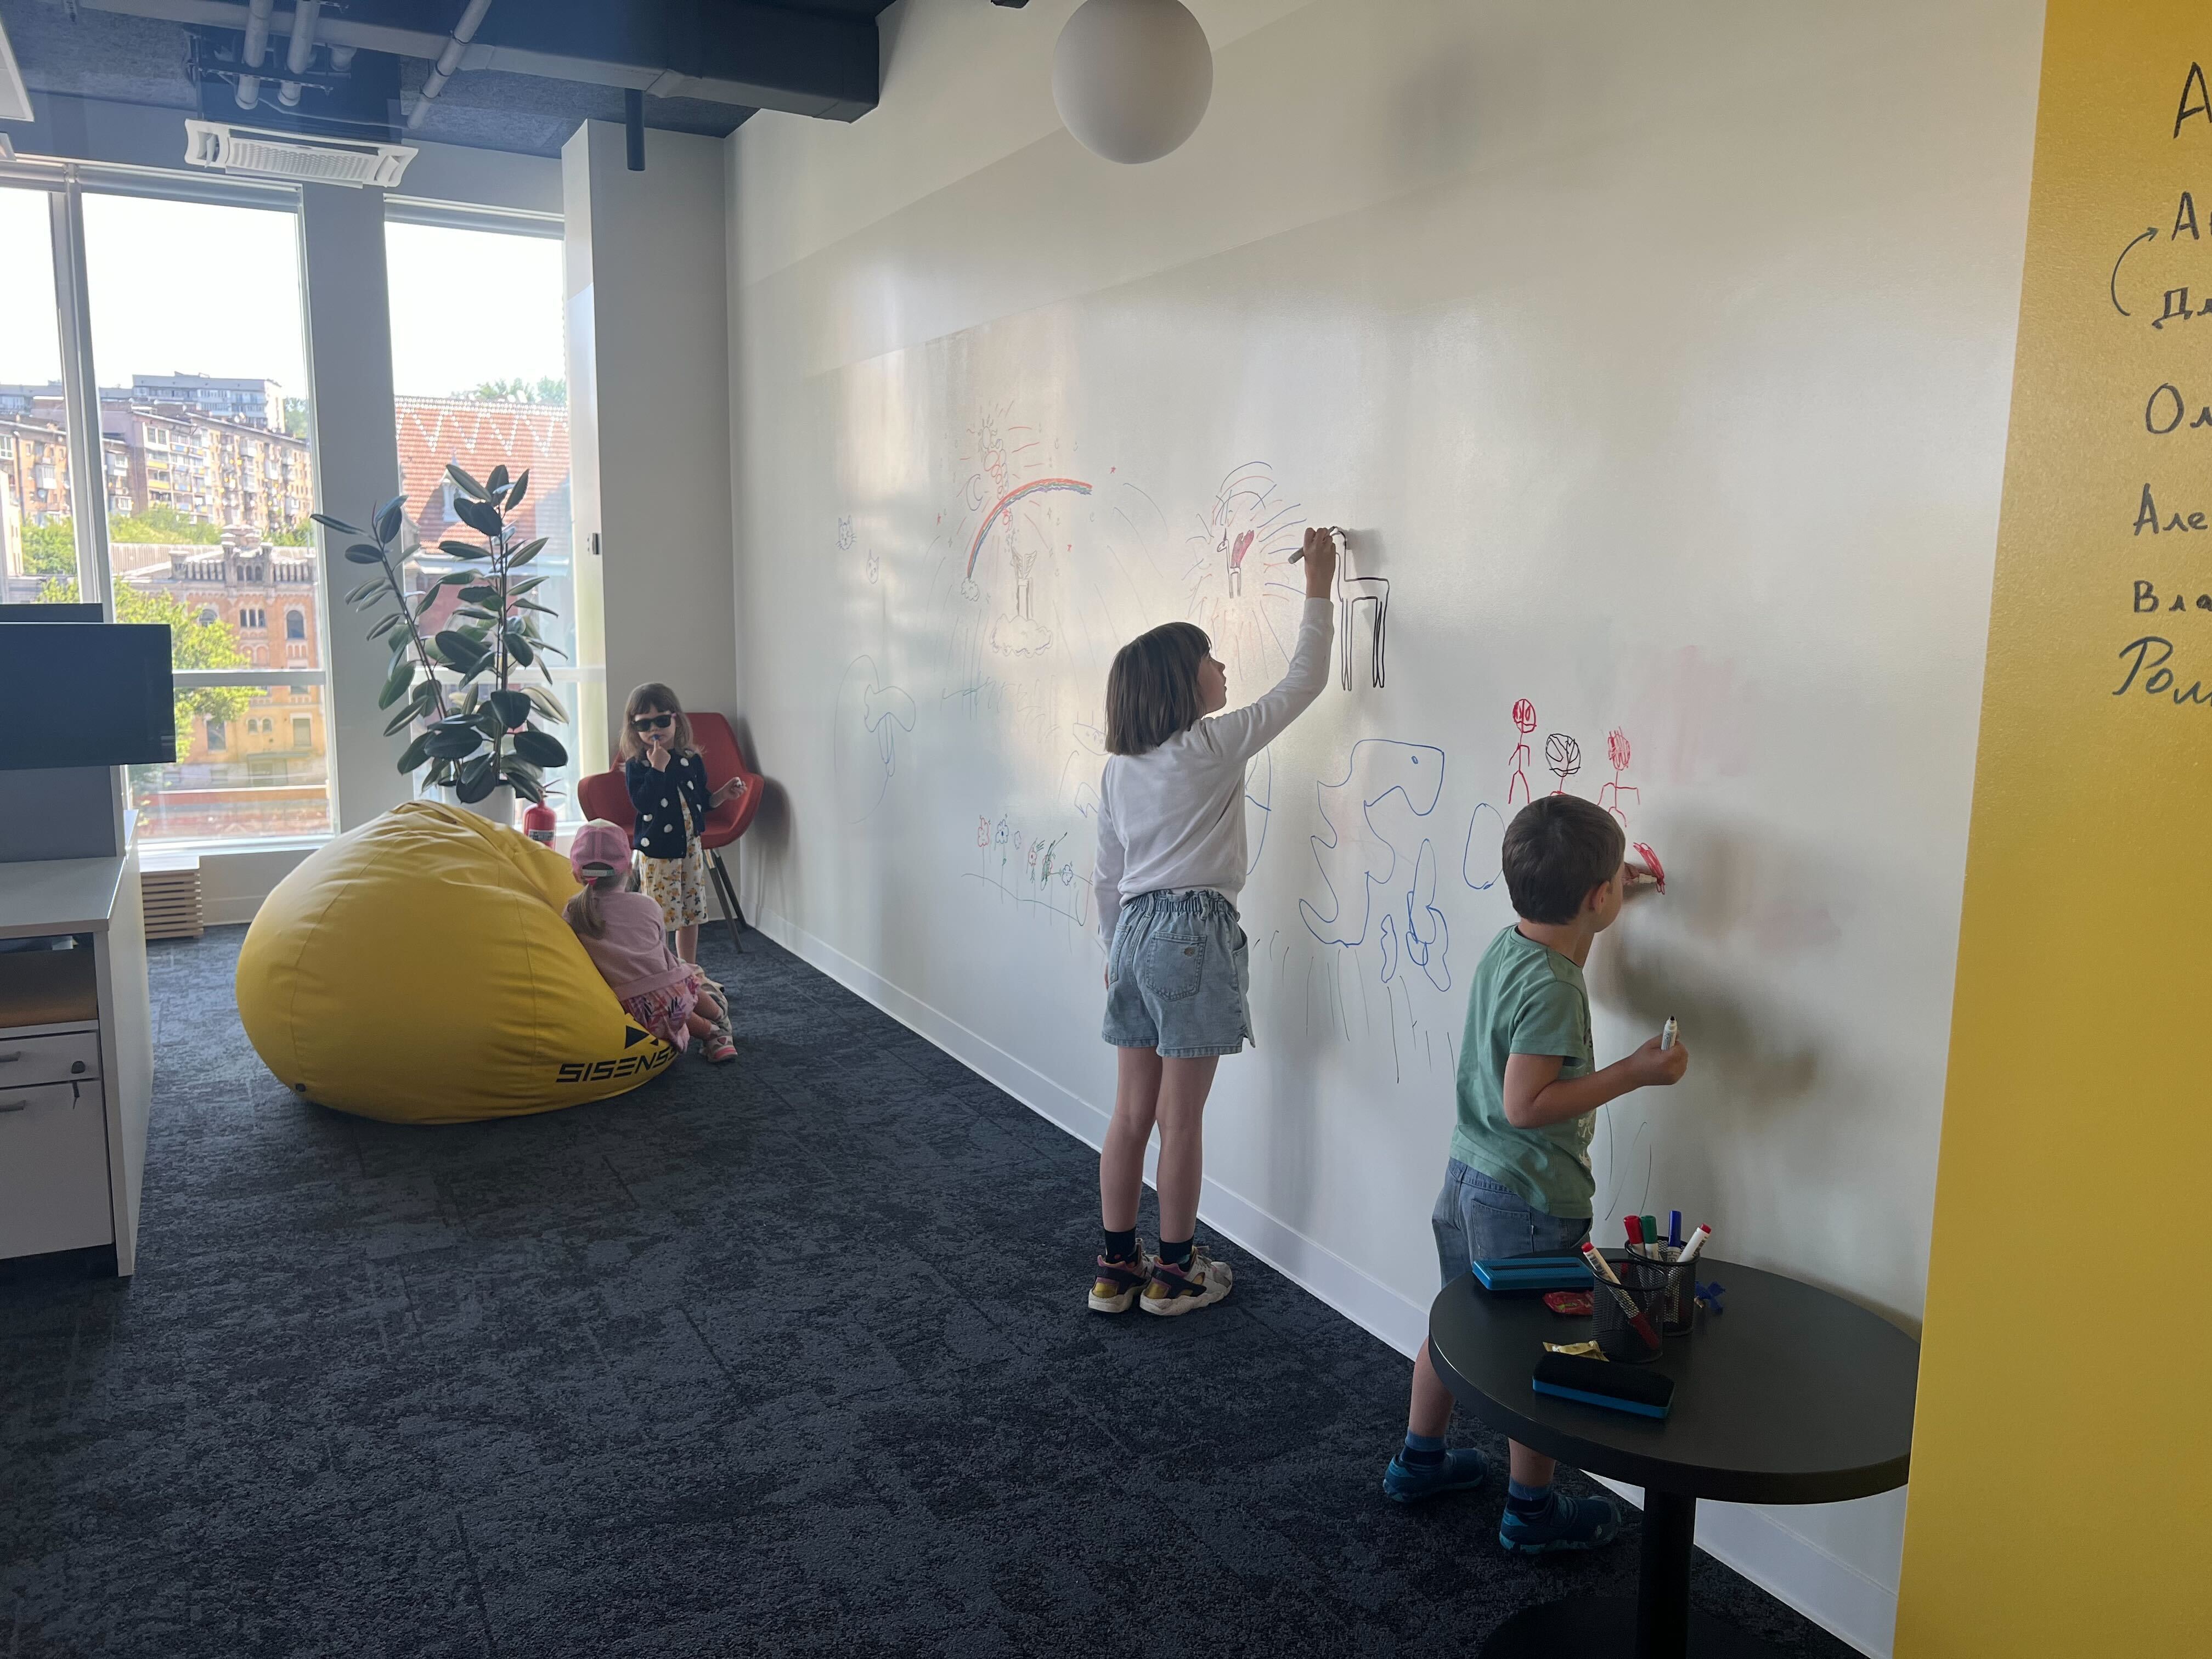  Kids draw on the whiteboard at Sisense offices for the company’s “kids day” event.